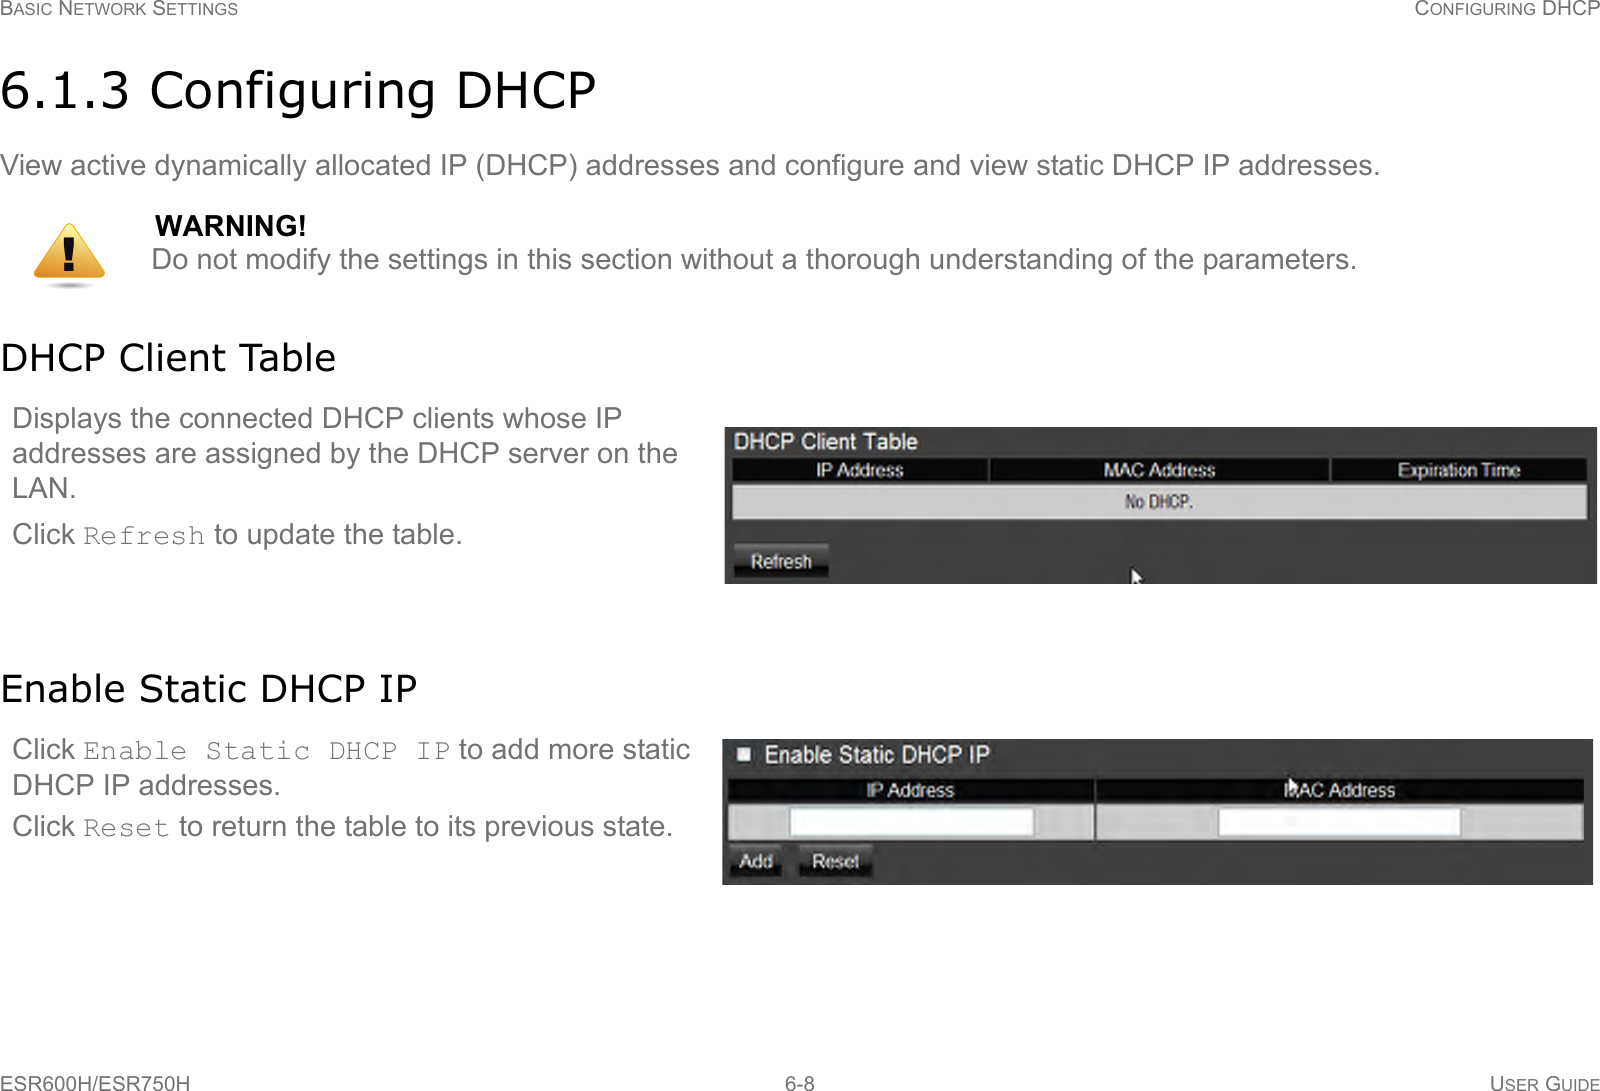 BASIC NETWORK SETTINGS CONFIGURING DHCPESR600H/ESR750H 6-8 USER GUIDE6.1.3 Configuring DHCPView active dynamically allocated IP (DHCP) addresses and configure and view static DHCP IP addresses.DHCP Client TableEnable Static DHCP IPWARNING!Do not modify the settings in this section without a thorough understanding of the parameters.Displays the connected DHCP clients whose IP addresses are assigned by the DHCP server on the LAN. Click Refresh to update the table.Click Enable Static DHCP IP to add more static DHCP IP addresses. Click Reset to return the table to its previous state.!